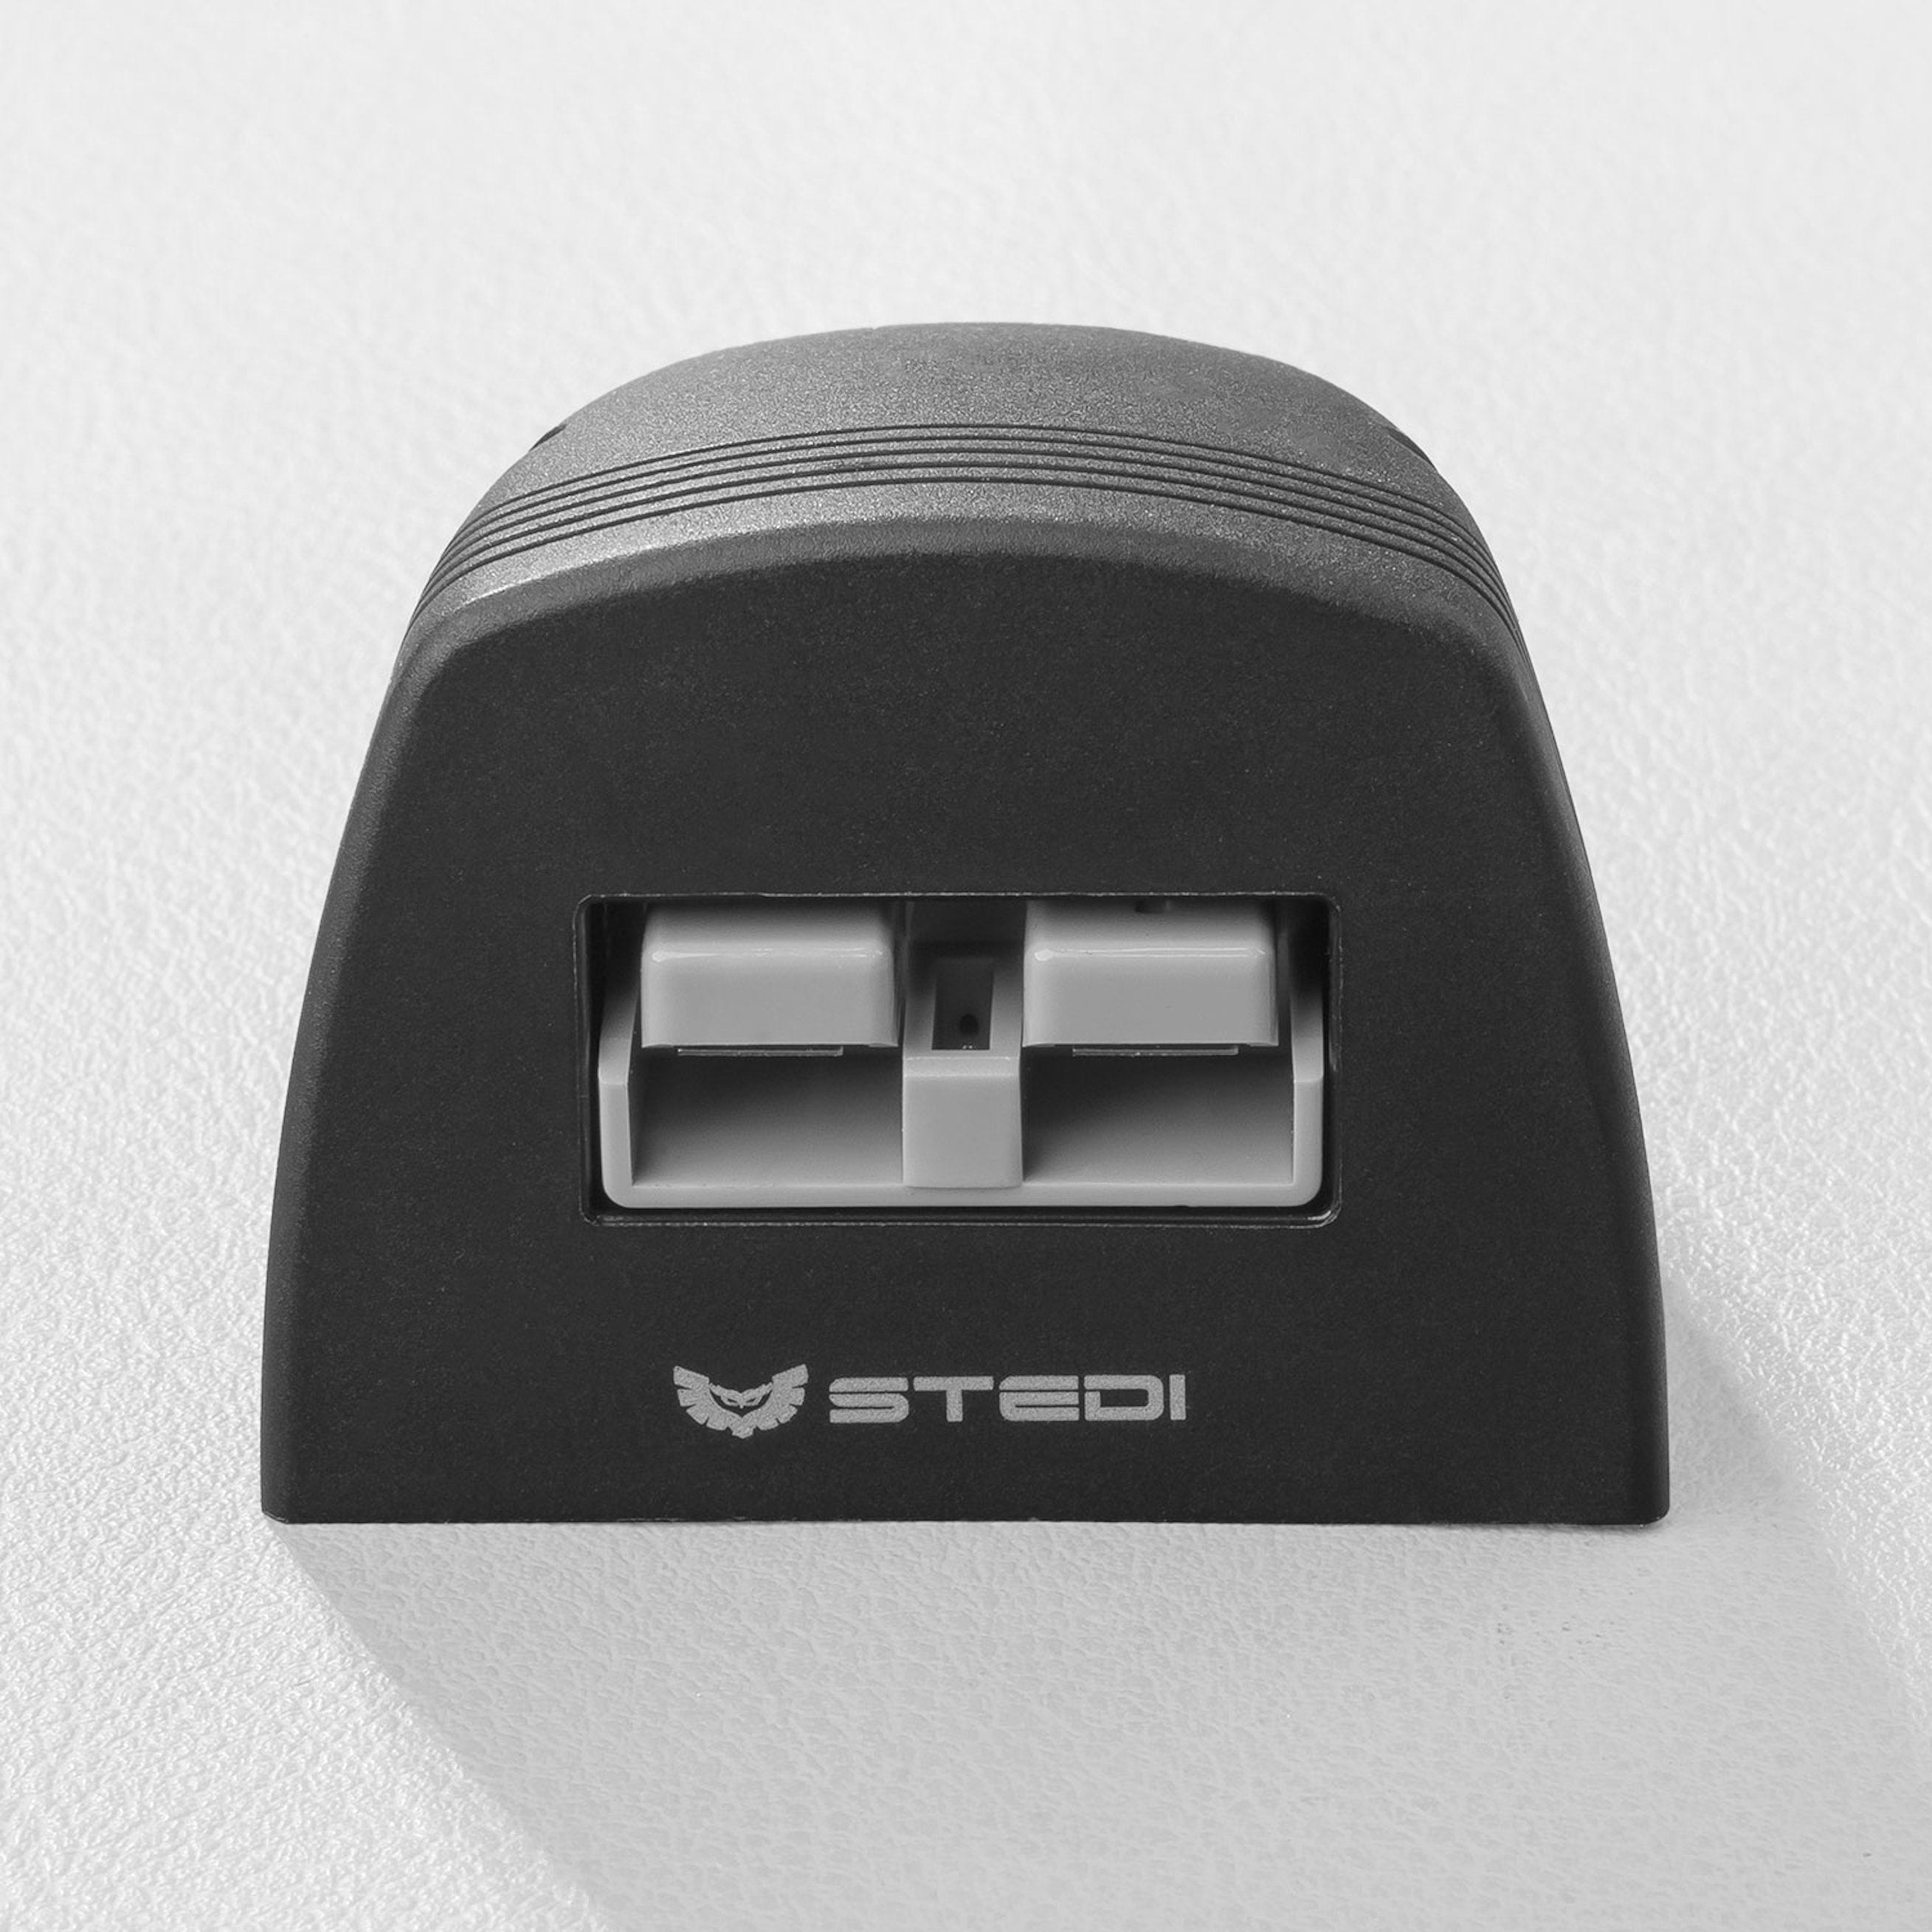 STEDI 1-gang Anderson Style surface mount